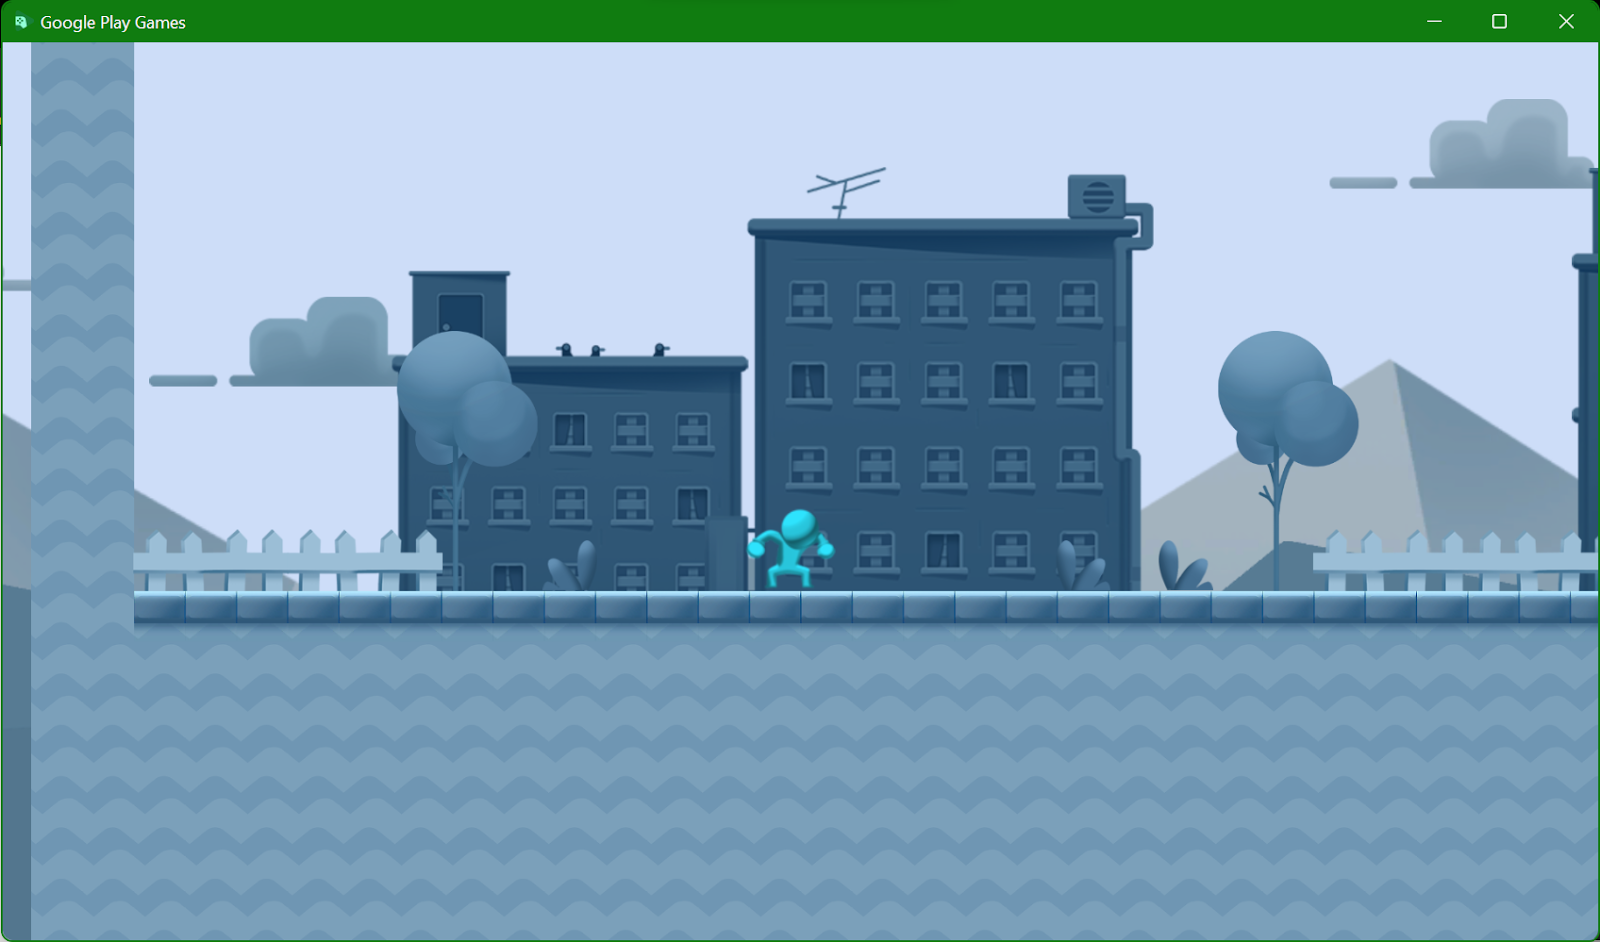 Screenshot of the Google Play Games emulator with the "2D Platformer Microgame" running